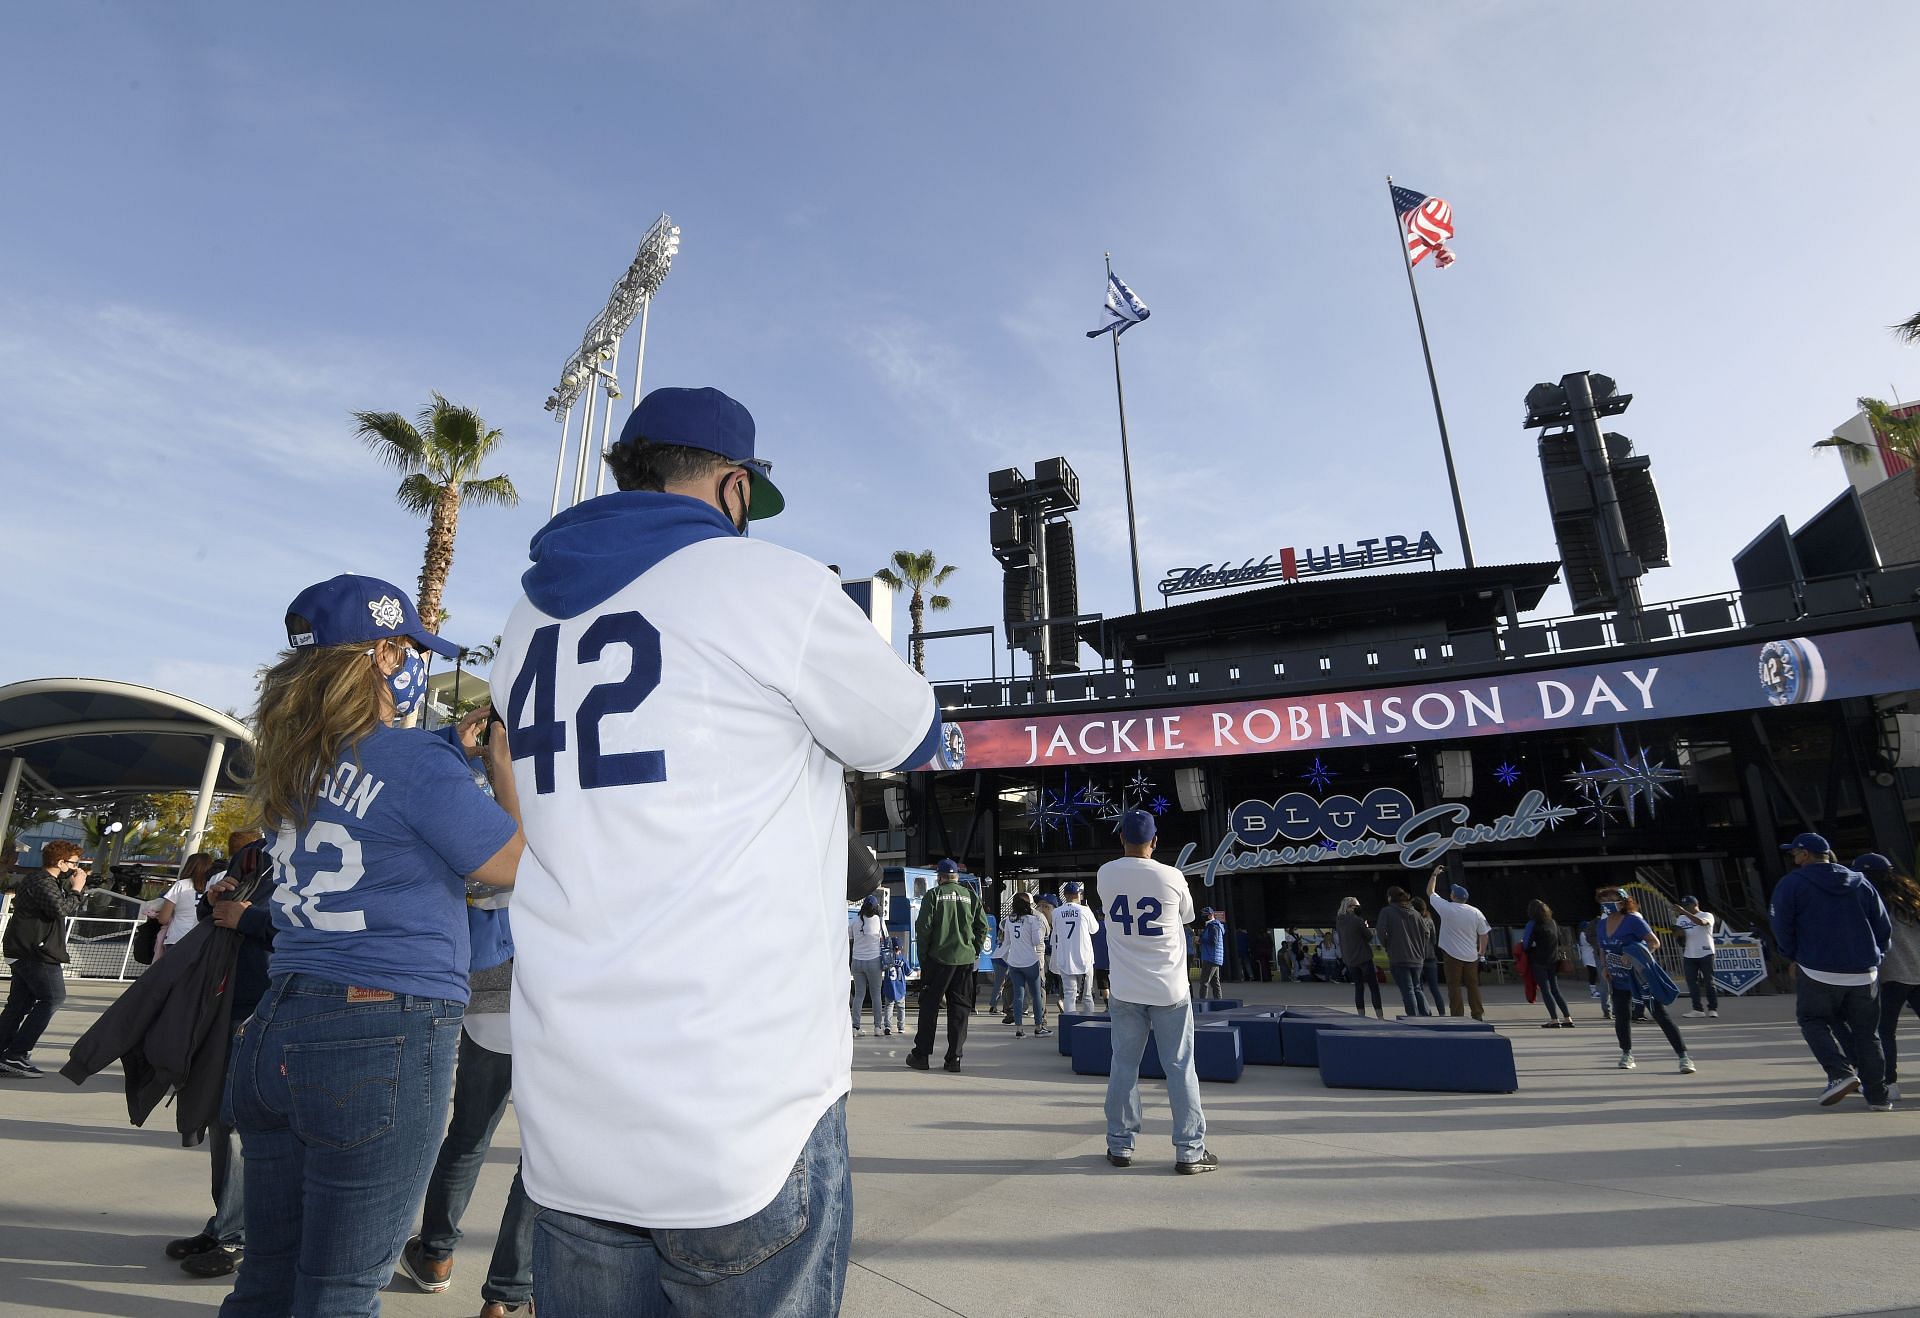 Dodgers fans on Jackie Robinson Day